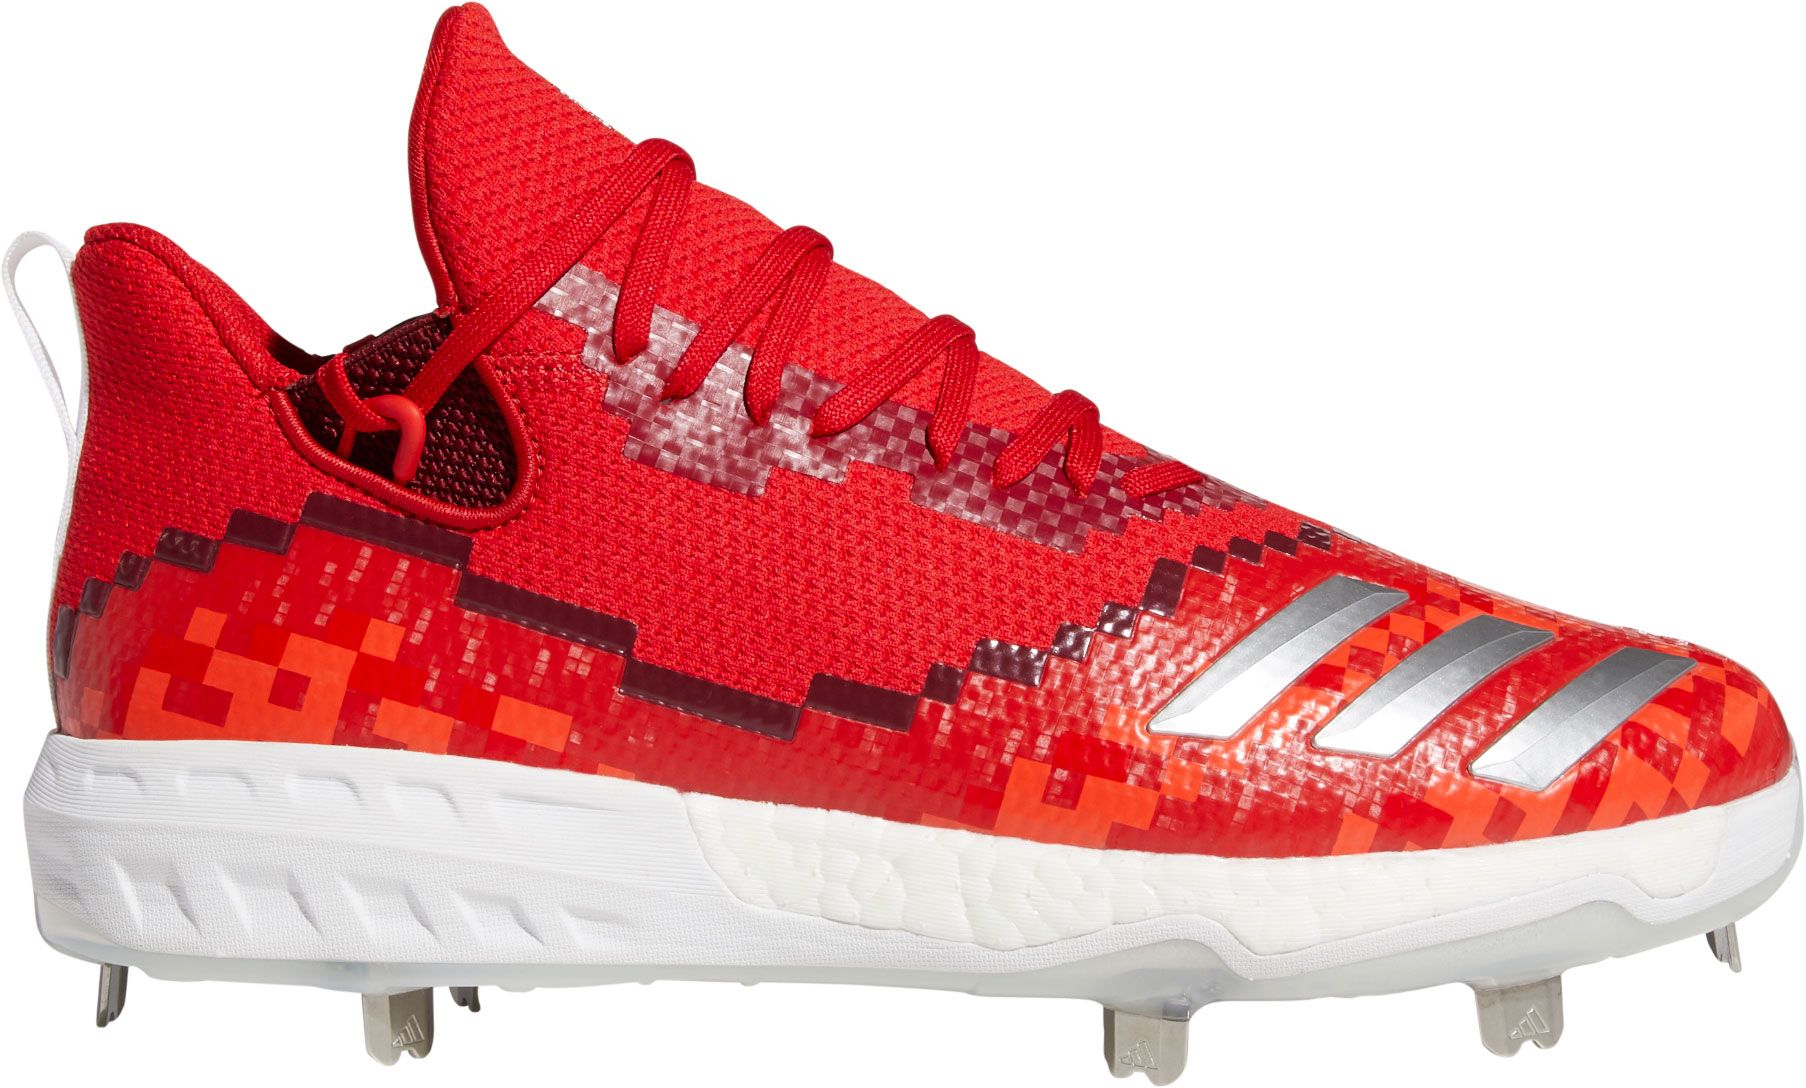 red metal cleats